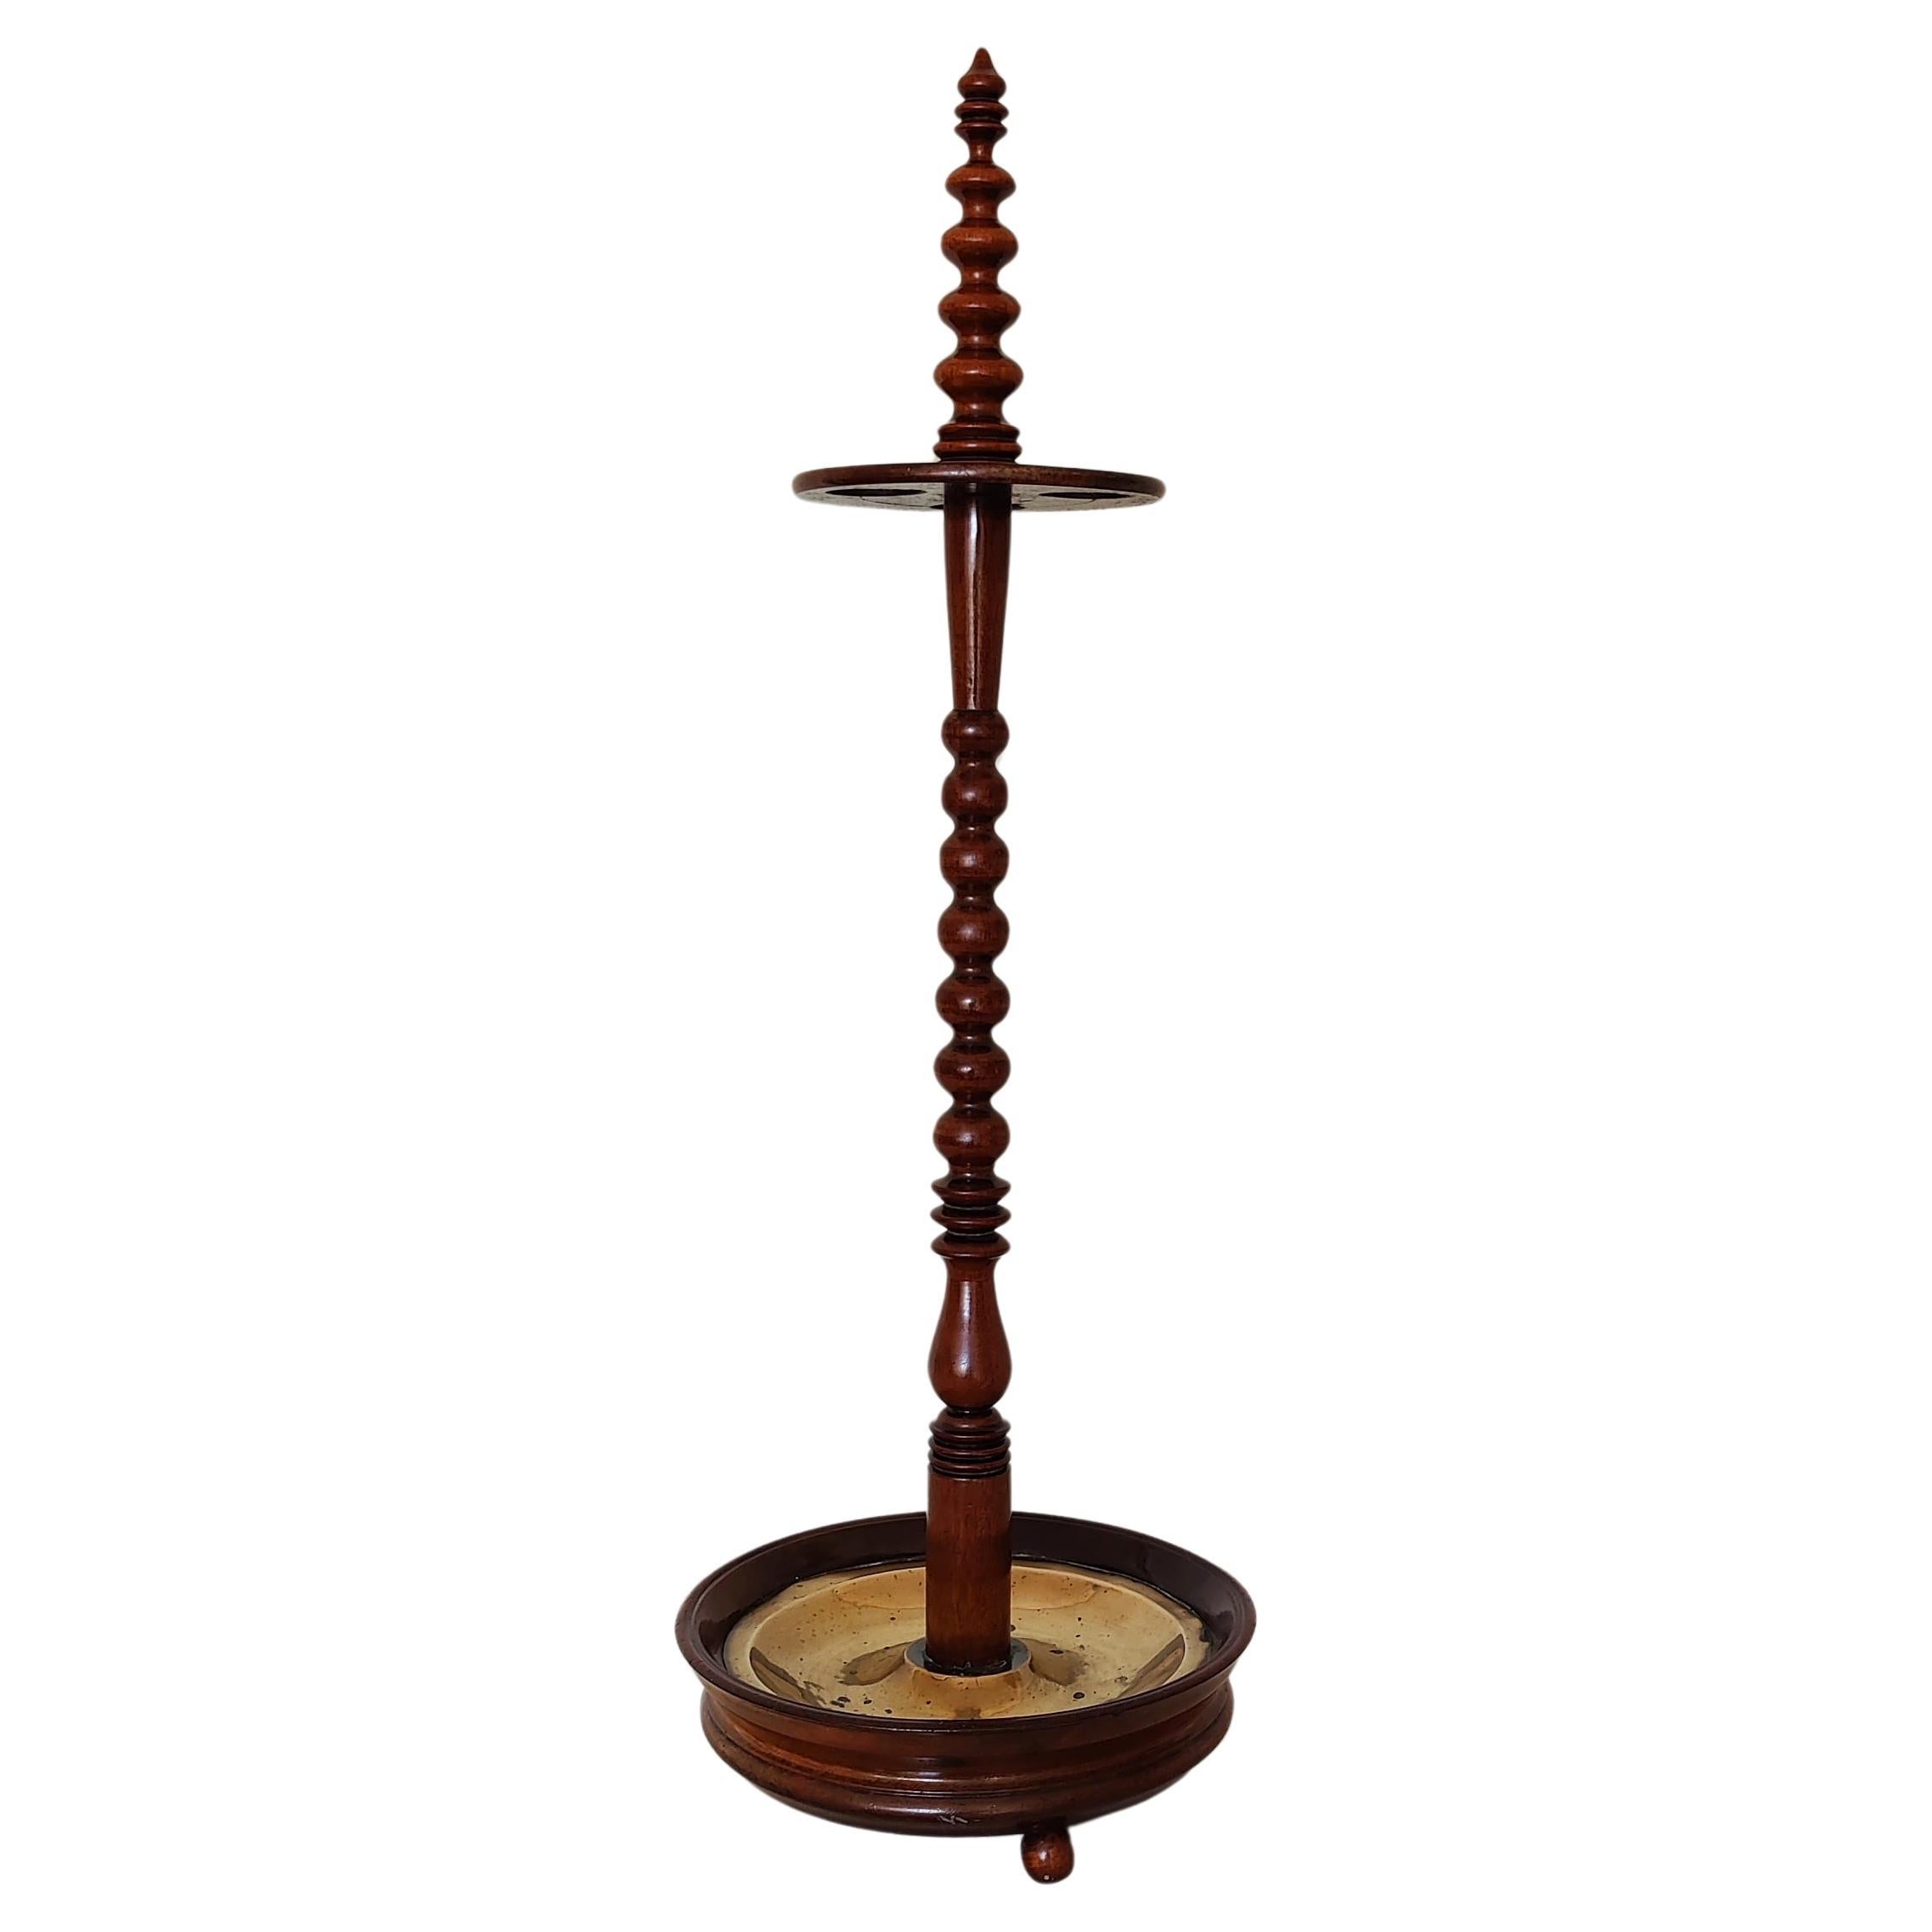 19th Century Dutch Wooden Pipe Holder or Pipe Stand with Twisted Stem